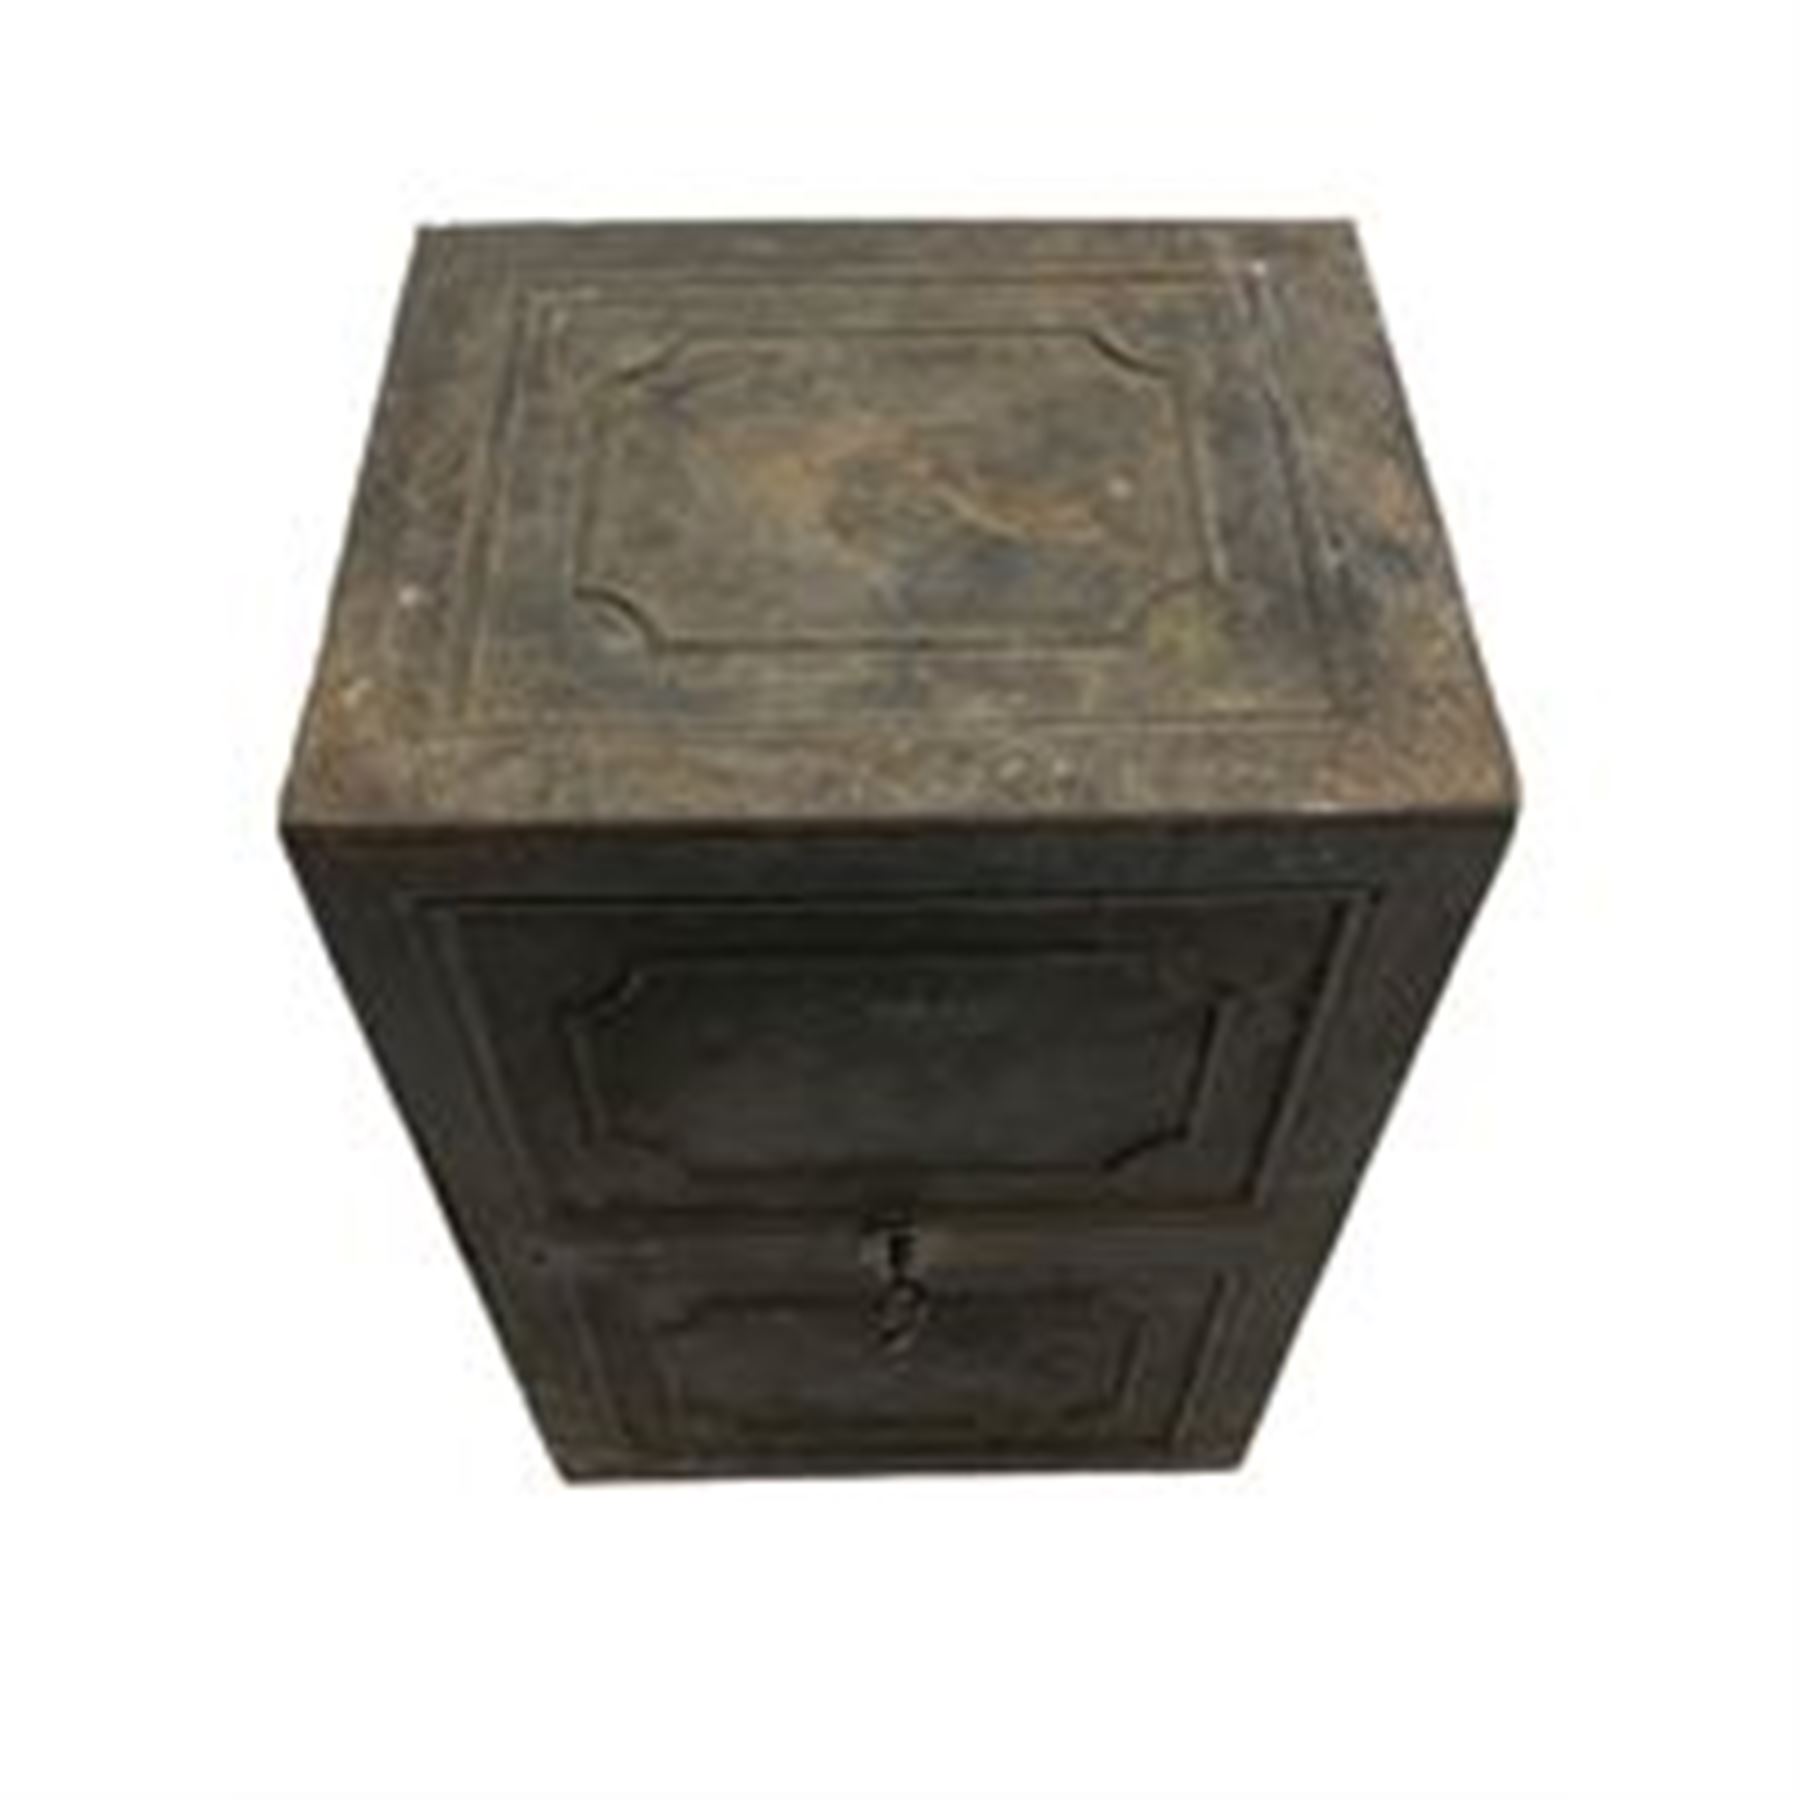 Early 19th century cast iron safe or strong box - Image 4 of 5